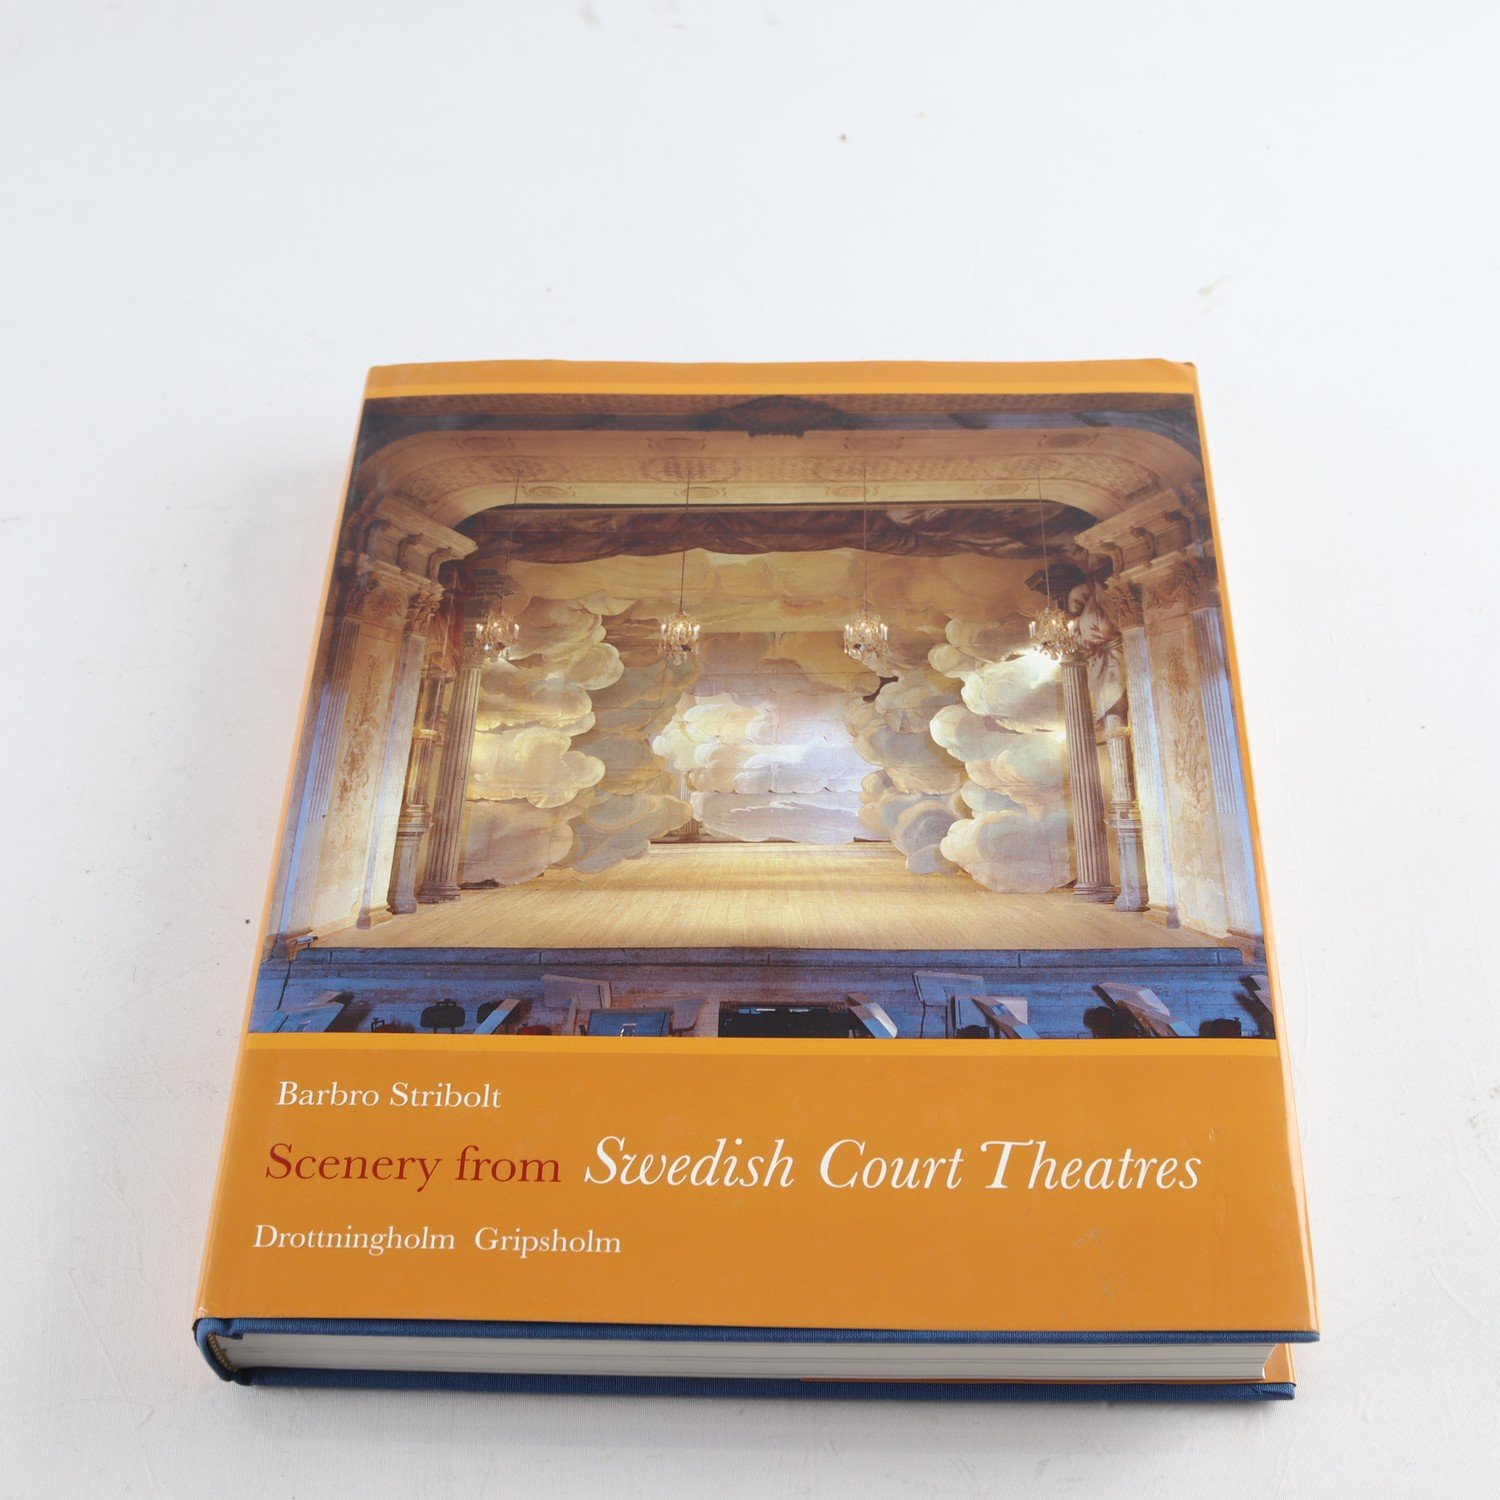 Scenery from Swedish Court Theatres, Barbro Stribolt